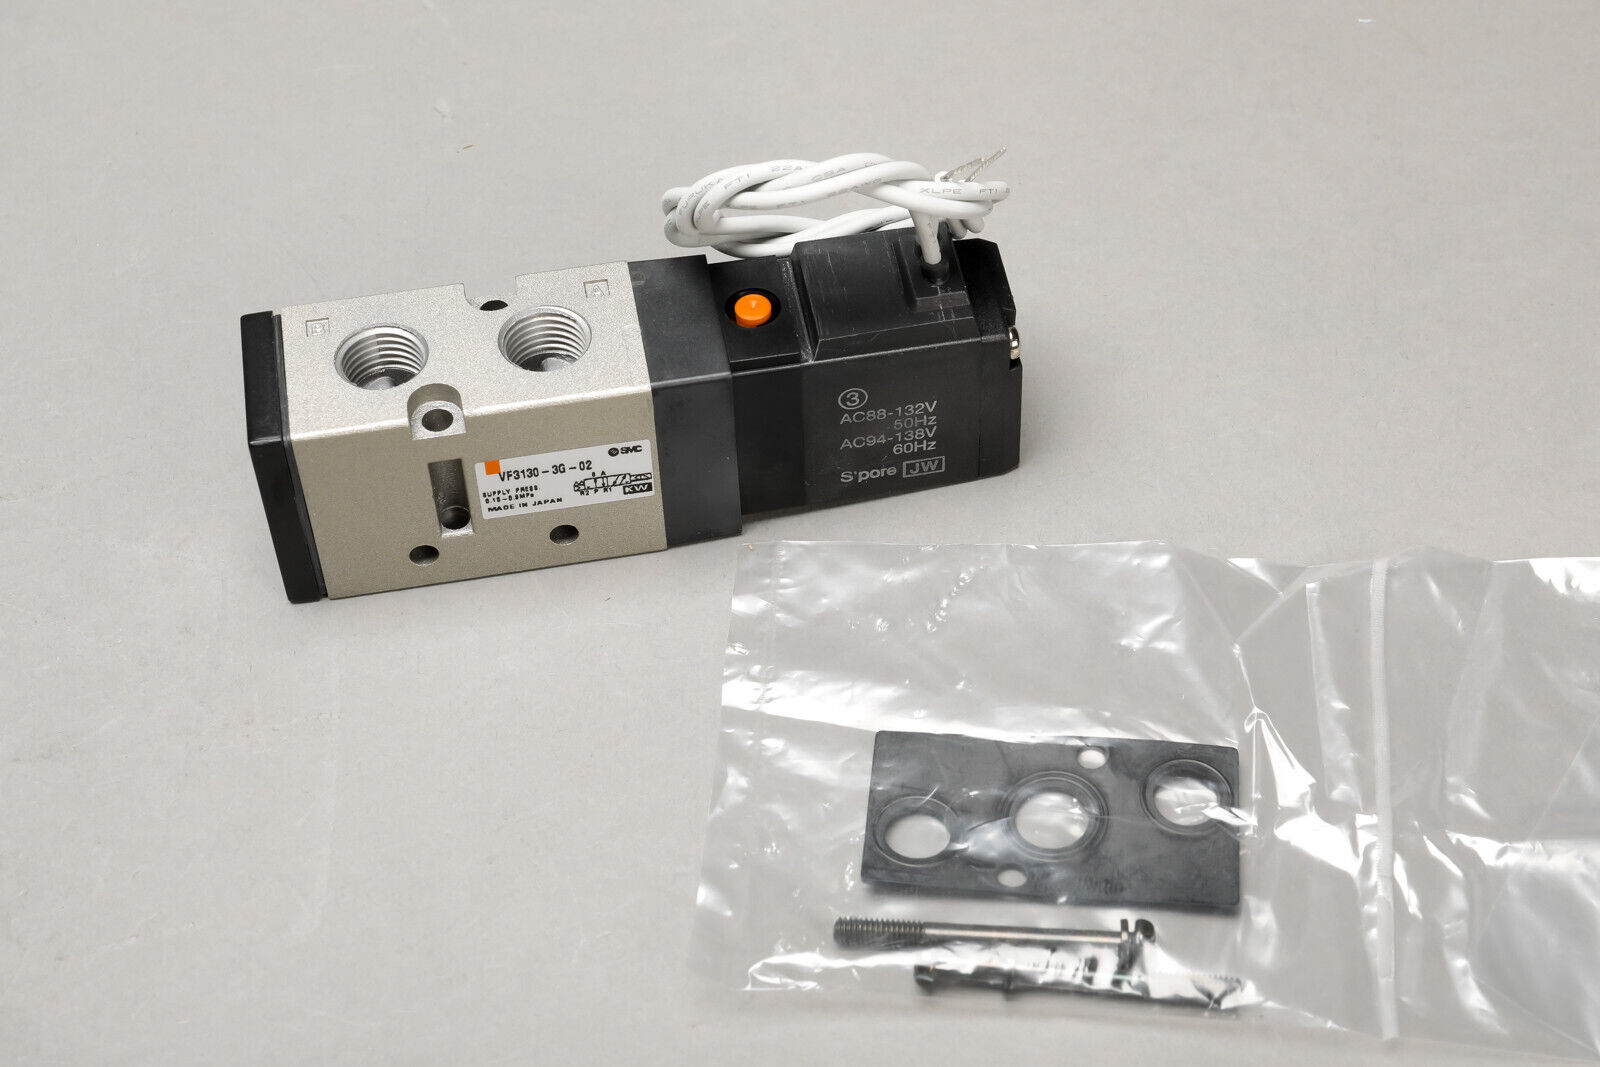 NEW IN BAG Genuine SMC VF3130-3G-02 Pneumatic Valve Asy FAST SHIP FROM USA